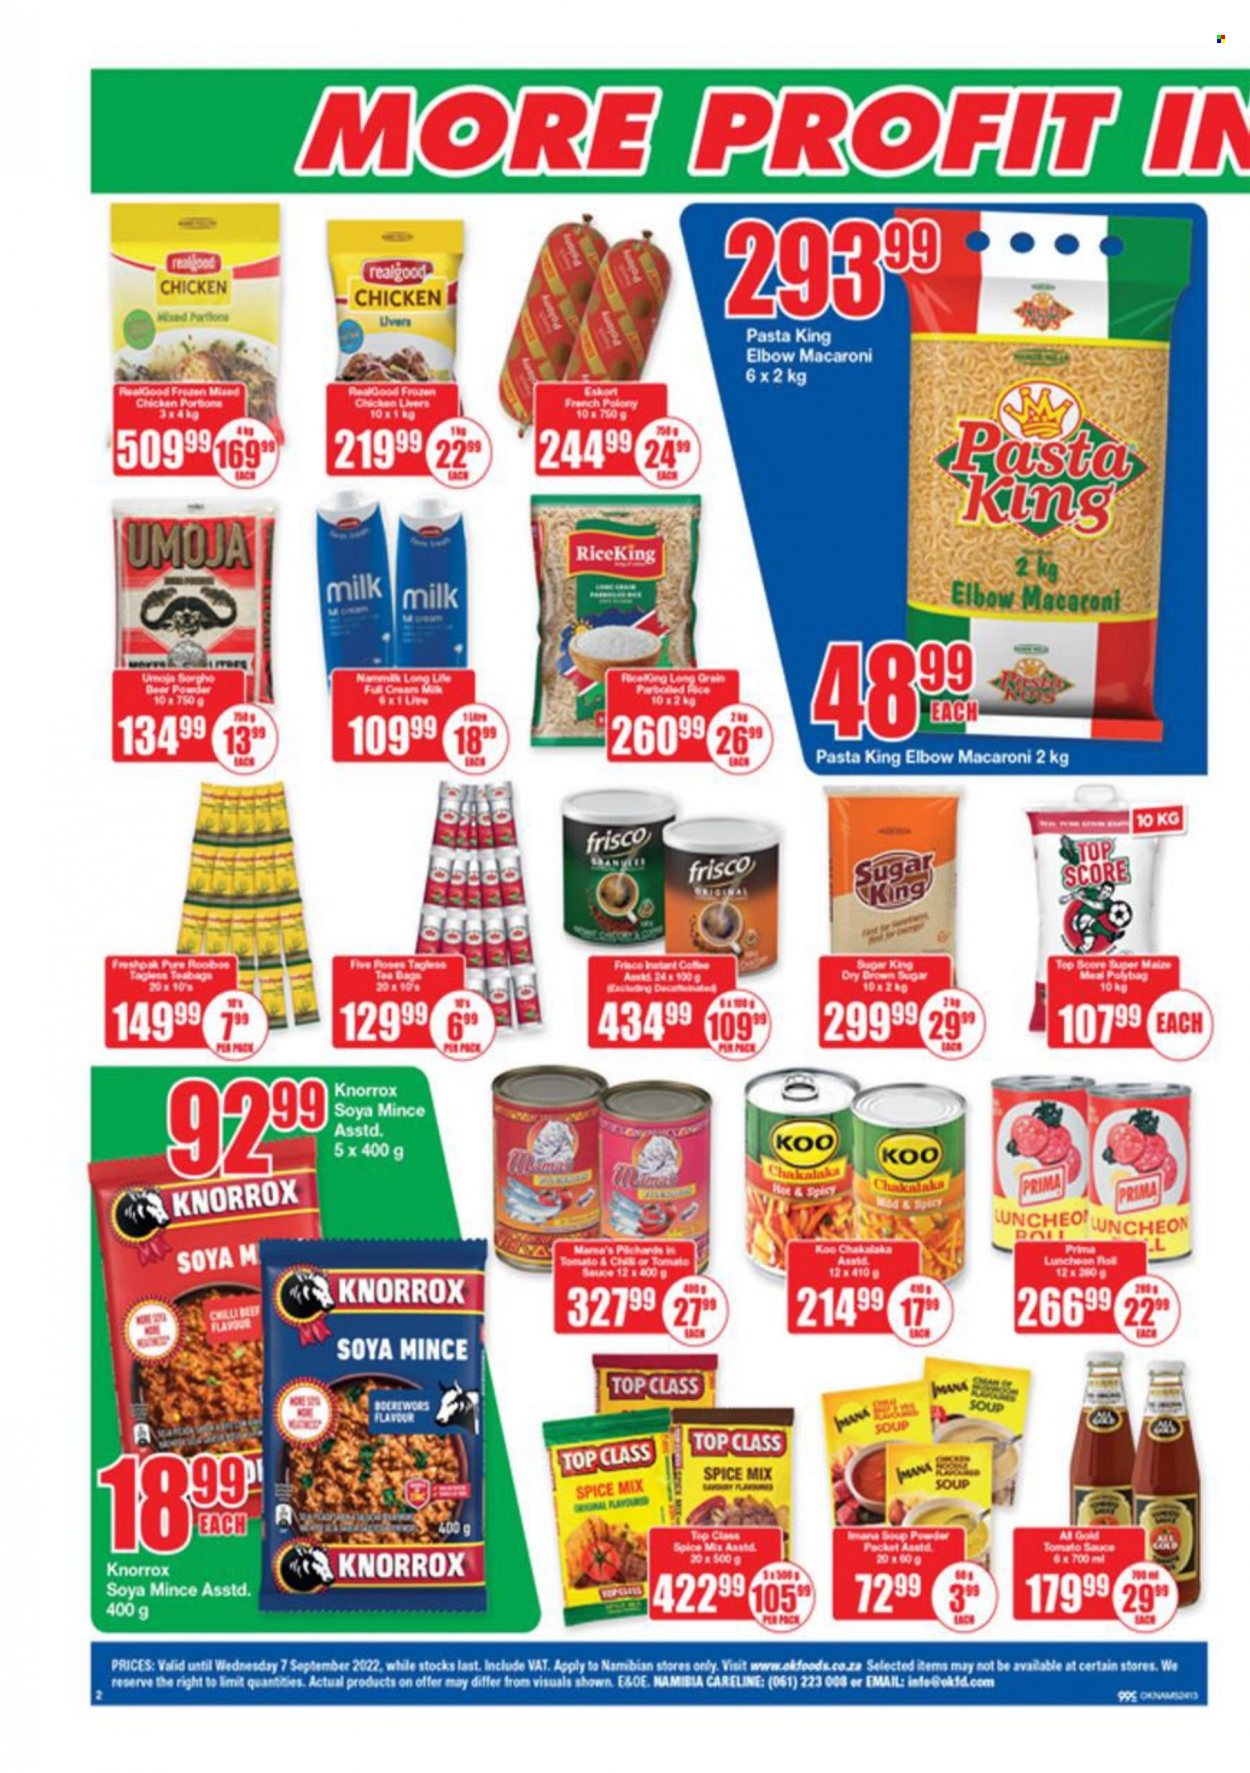 OK catalogue  - 19/08/2022 - 07/09/2022 - Sales products - macaroni, soup, pasta, chakalaka, french polony, polony, lunch meat, milk, sugar, maize meal, soya mince, Knorrox, Koo, spice, tea bags, rooibos tea, instant coffee, Frisco, chicken livers, braai wors. Page 2.